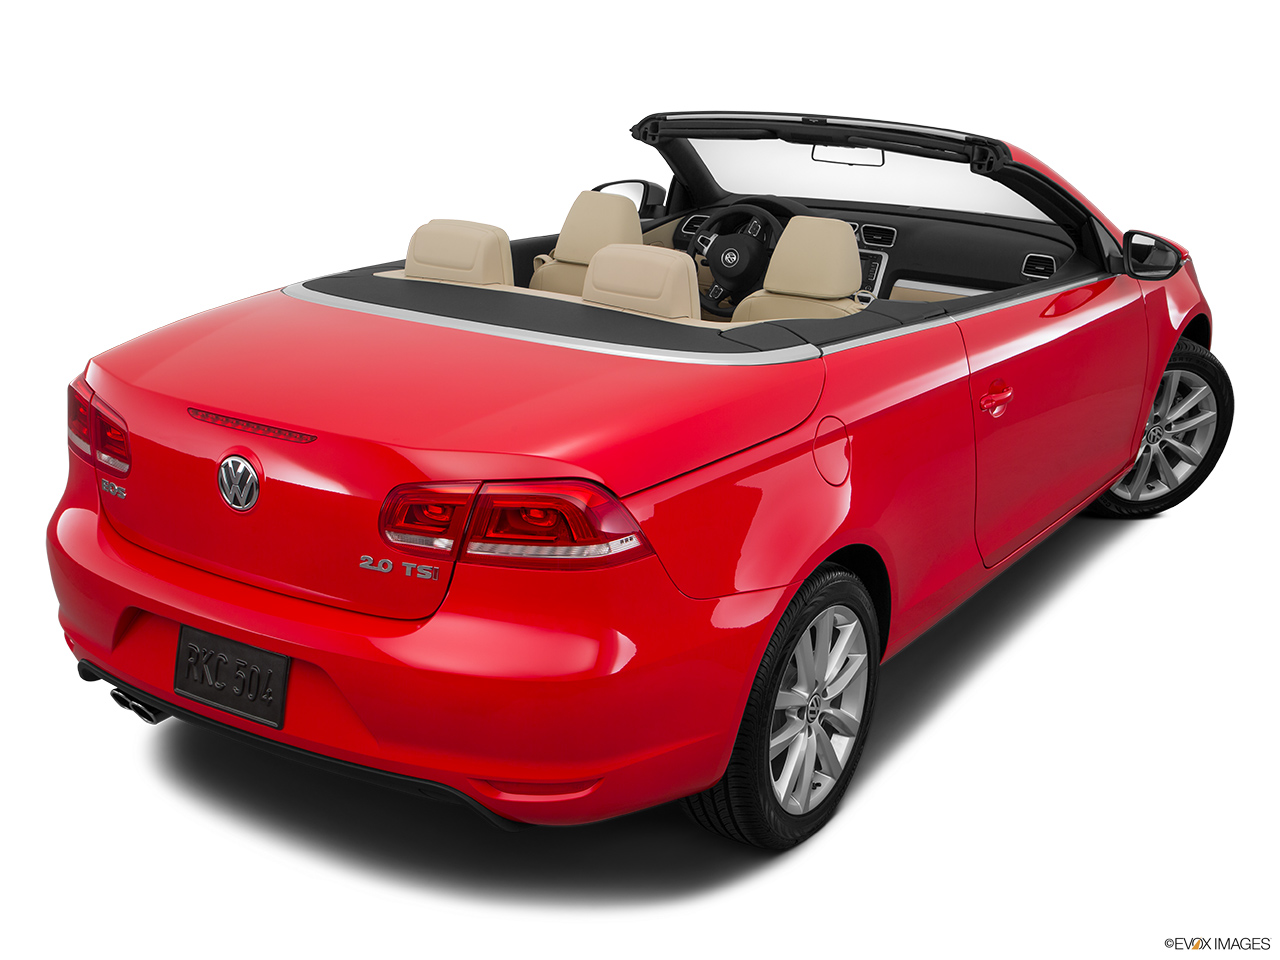 2016 Volkswagen Eos Komfort Edition Rear 3/4 angle view. 